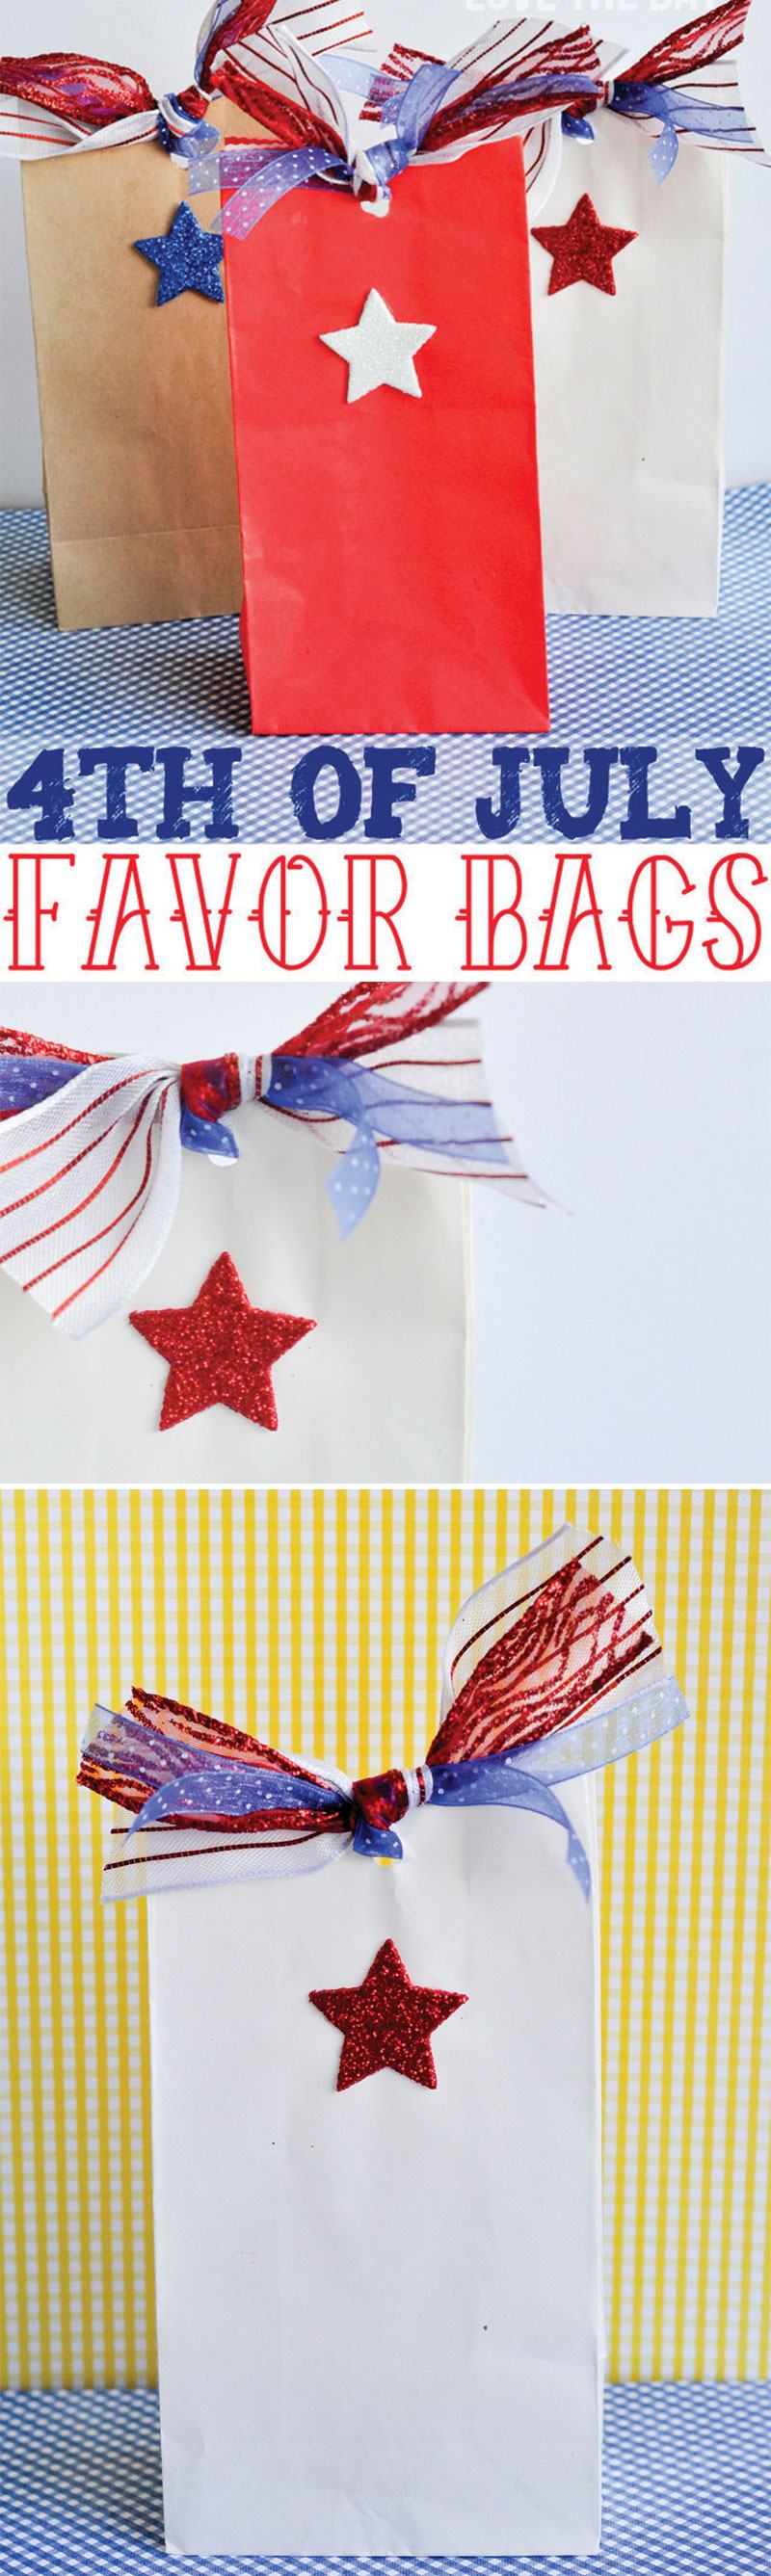 4th Of July Favor Bags by Lindi Haws of Love The Day